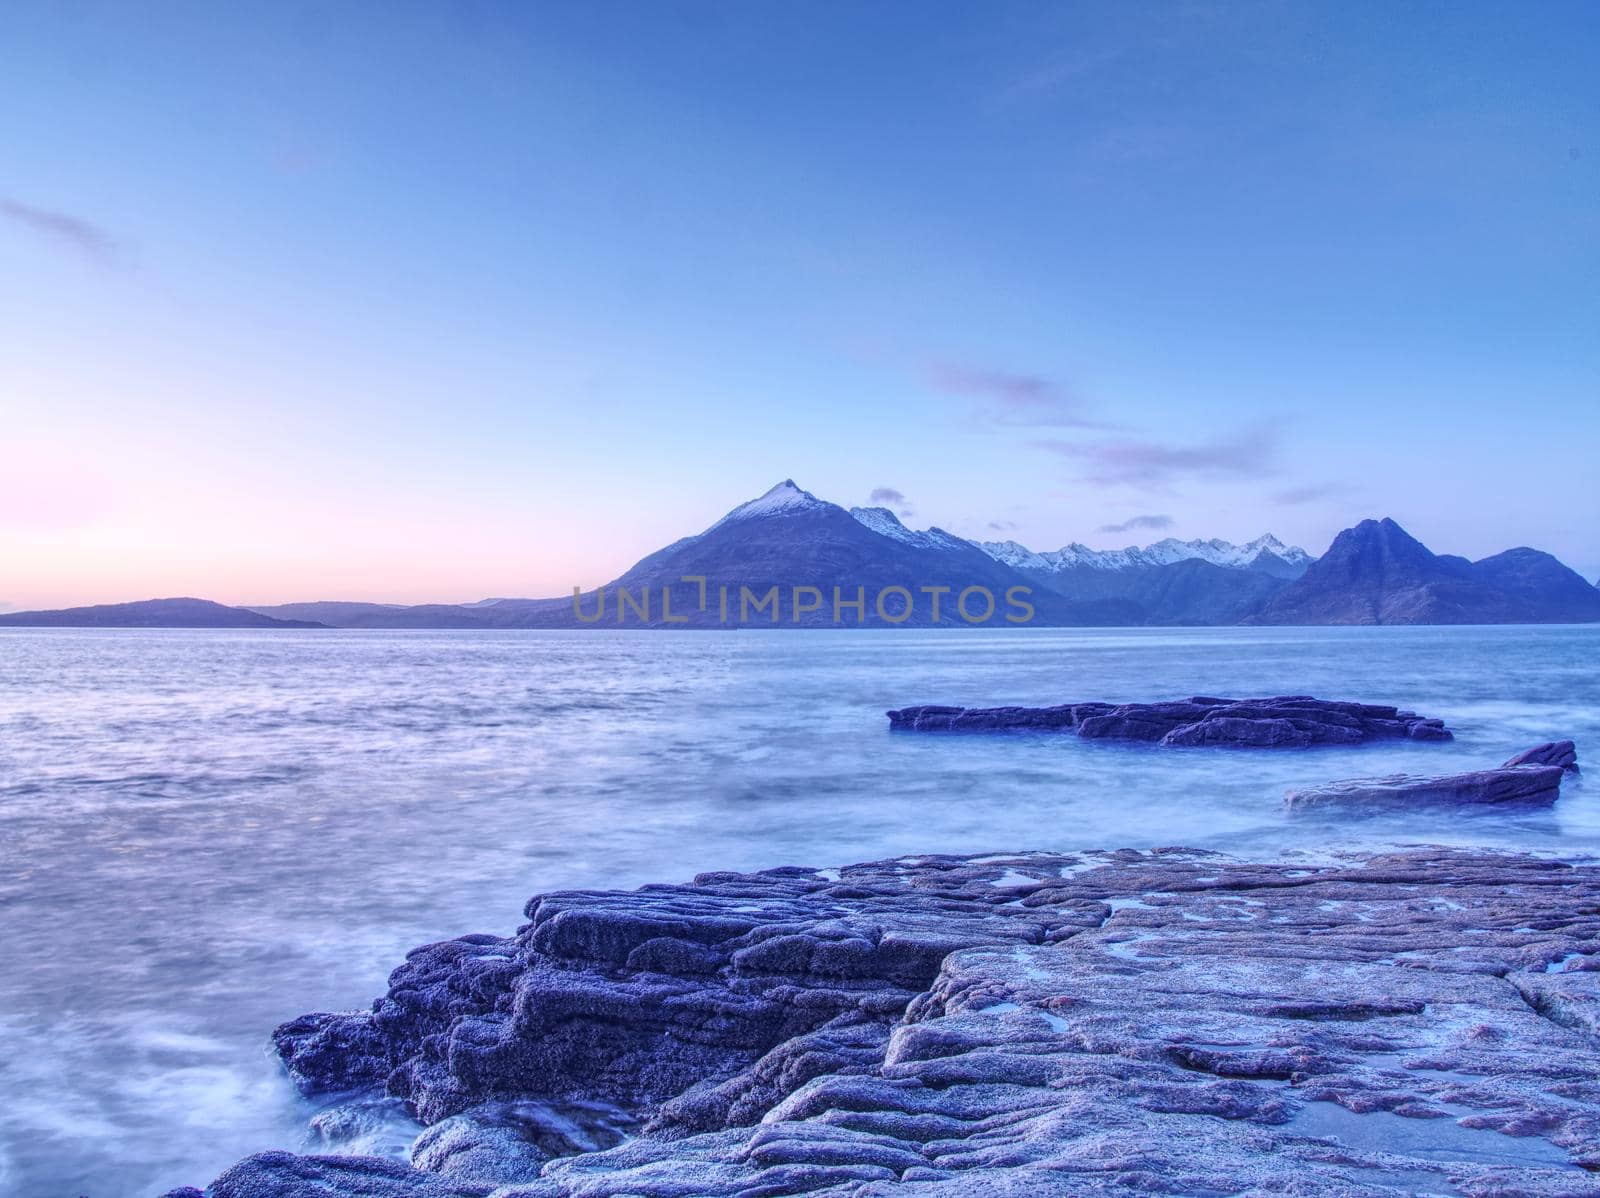 Rocky coastline in Elgol at sunset with cracked rocks in detail, Isle of Skye, Scotland. Blue shadows of cold February  dusk, clear sky.